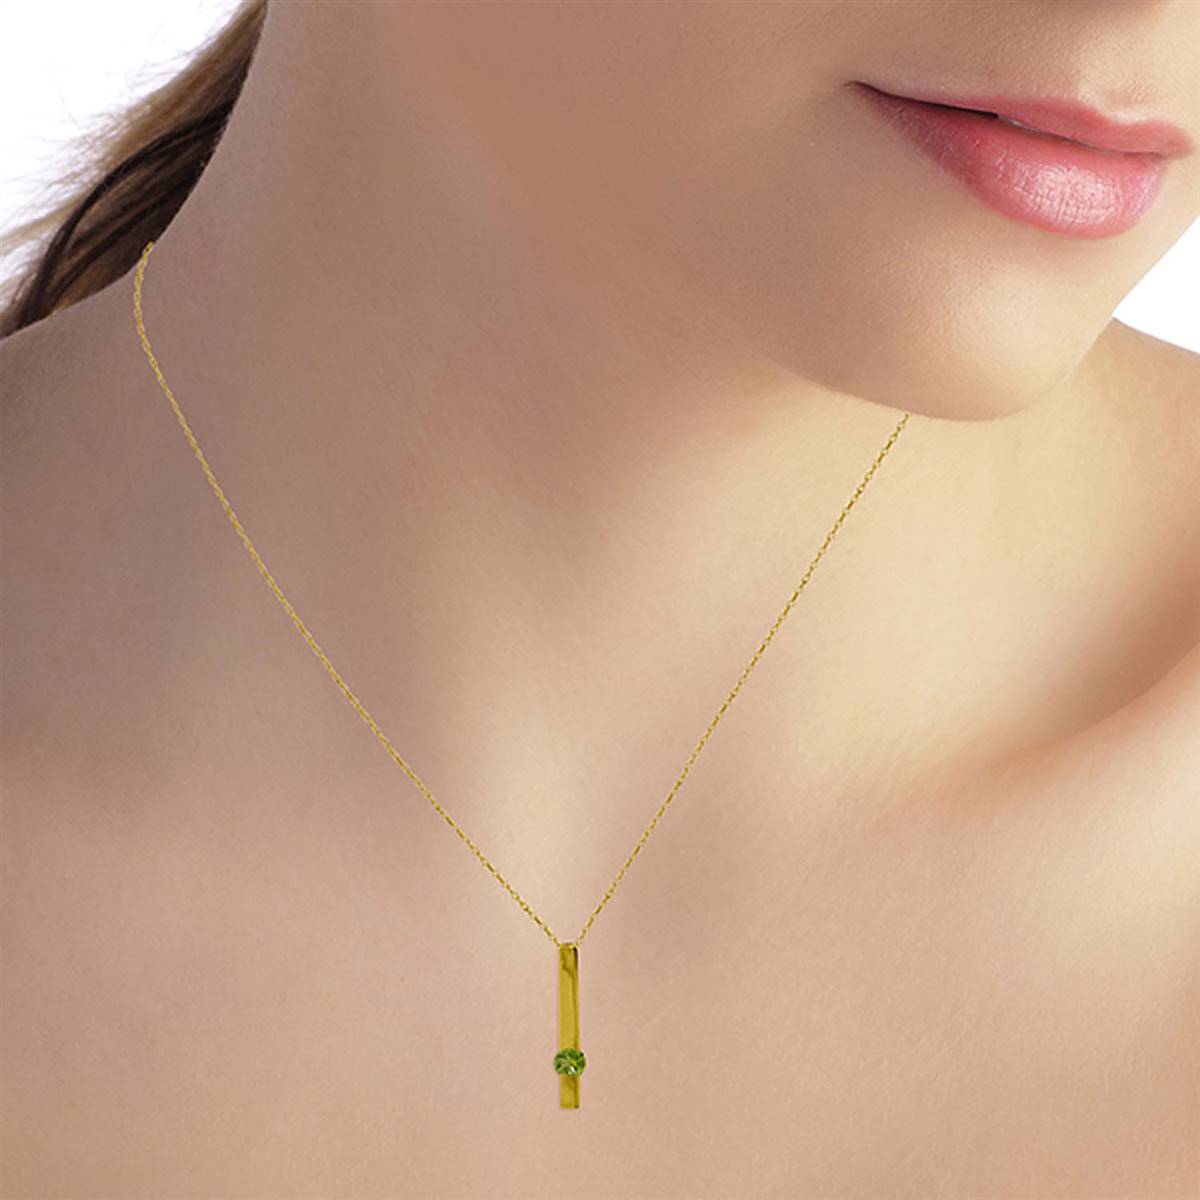 0.25 Carat 14K Solid Yellow Gold Love Comes Naturally Peridot Necklace